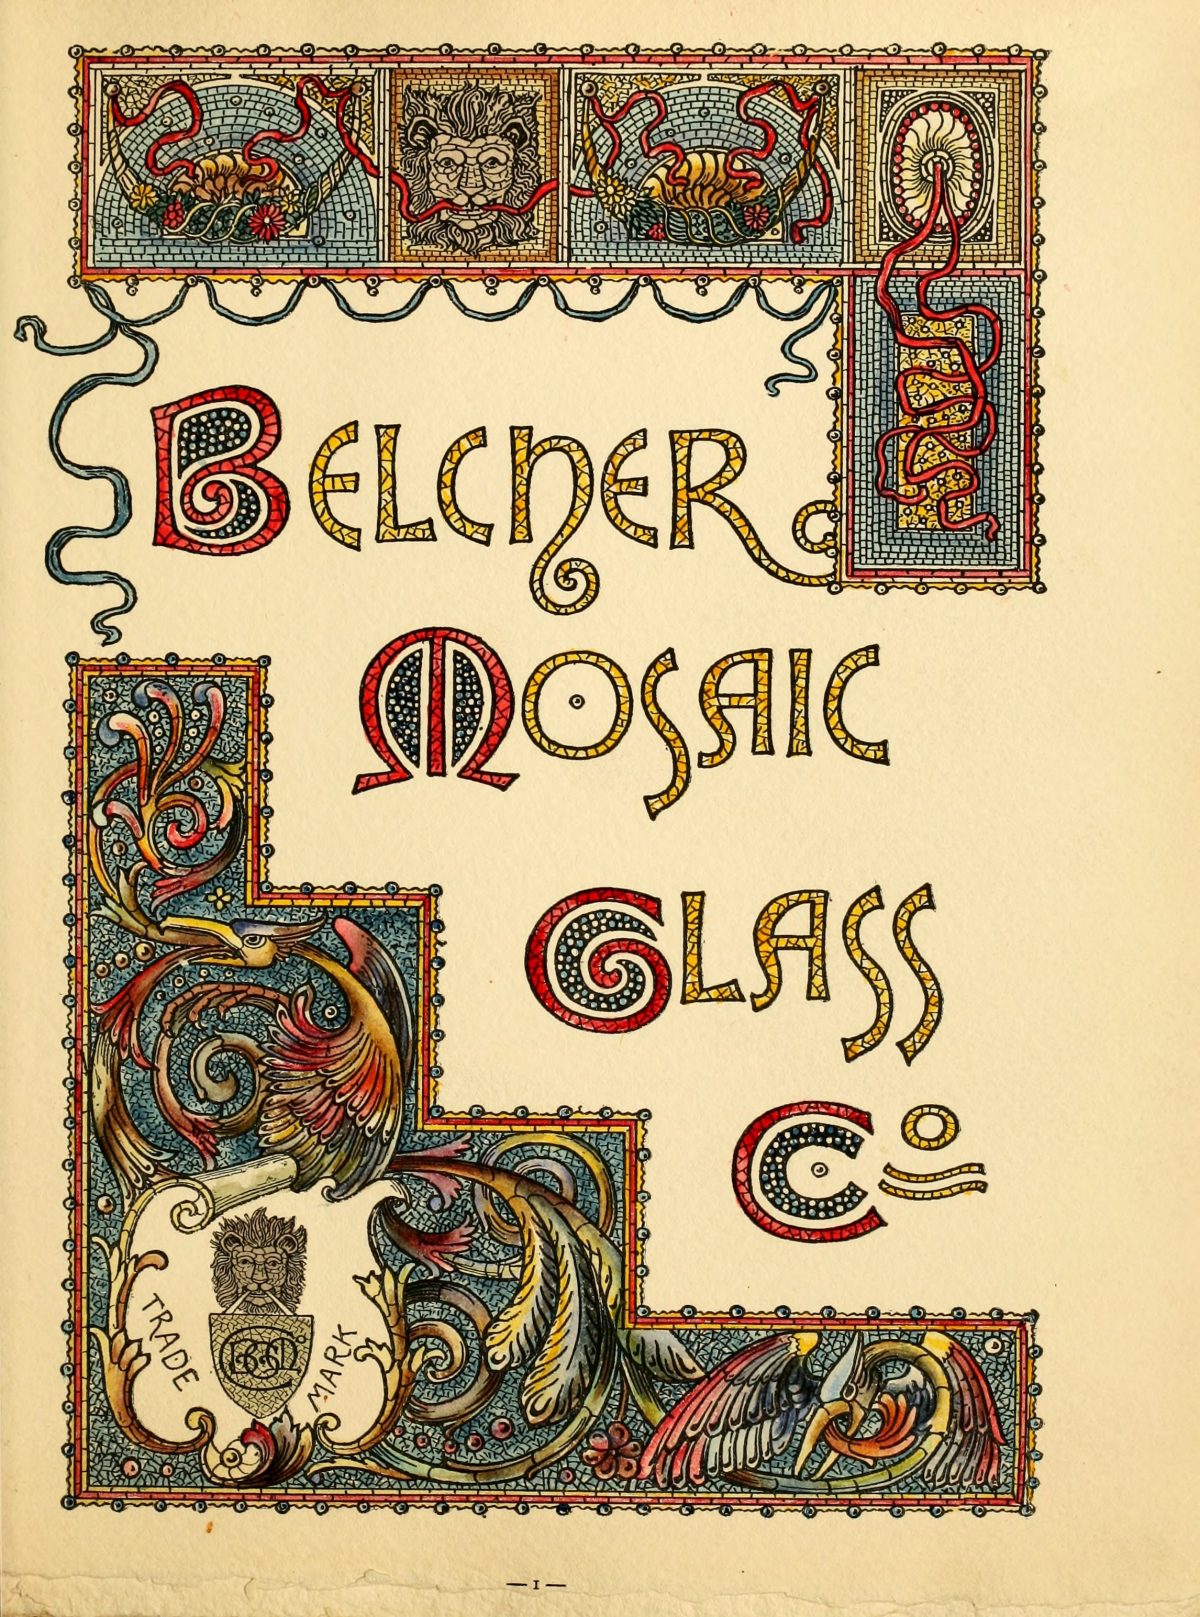 Glass Catalog by Belcher Mosaic Glass Co. New York, N.Y. 1886